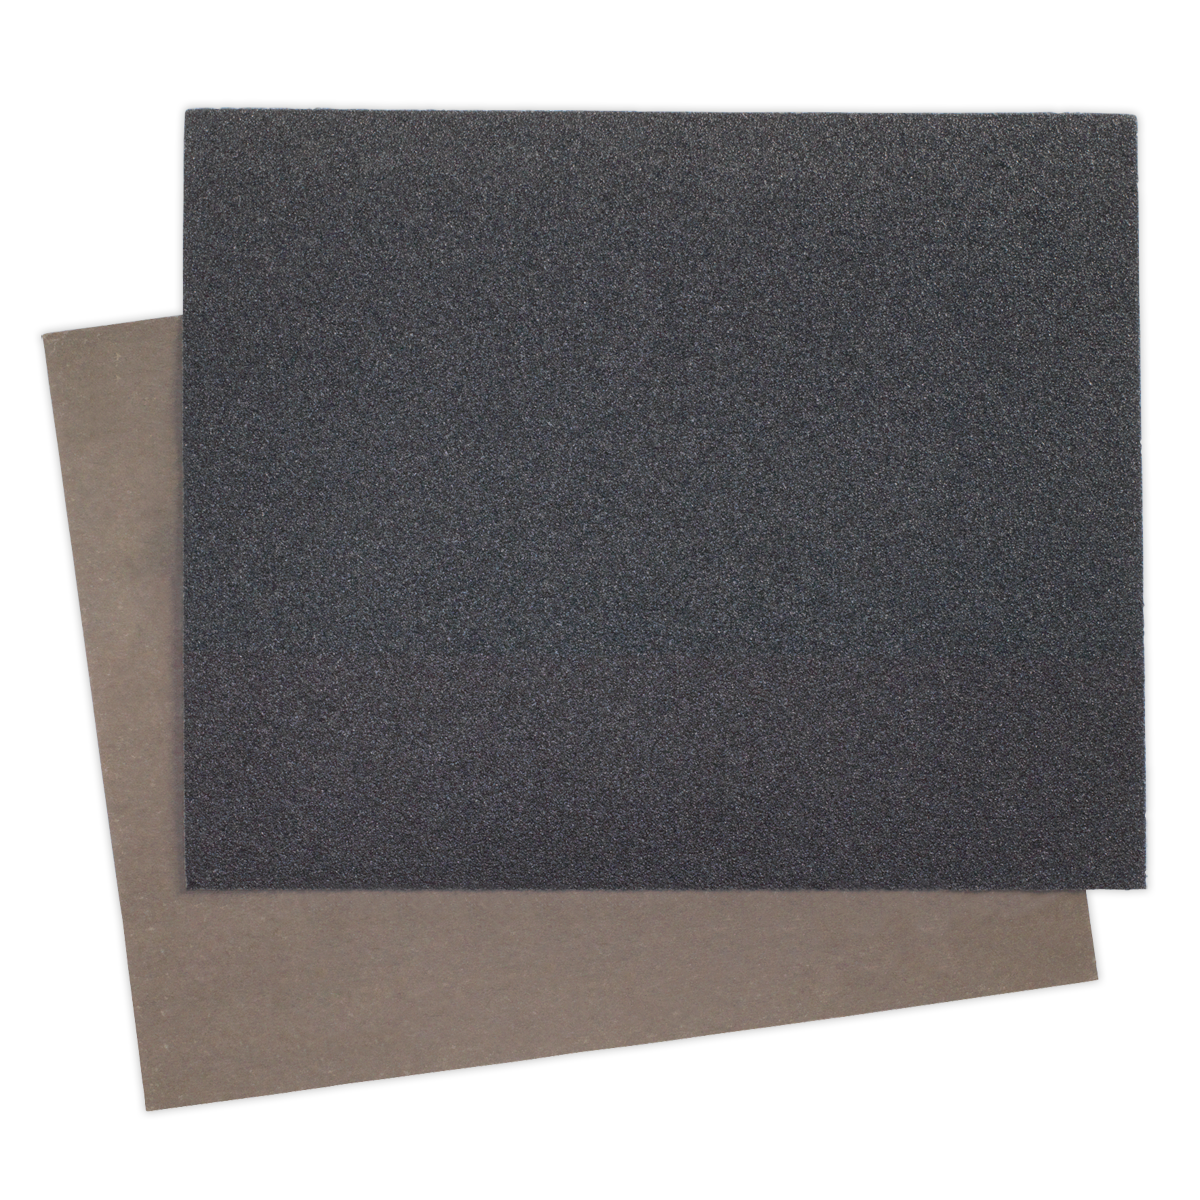 Wet & Dry Paper 230 x 280mm 1500Grit Pack of 25 - WD23281500 - Farming Parts